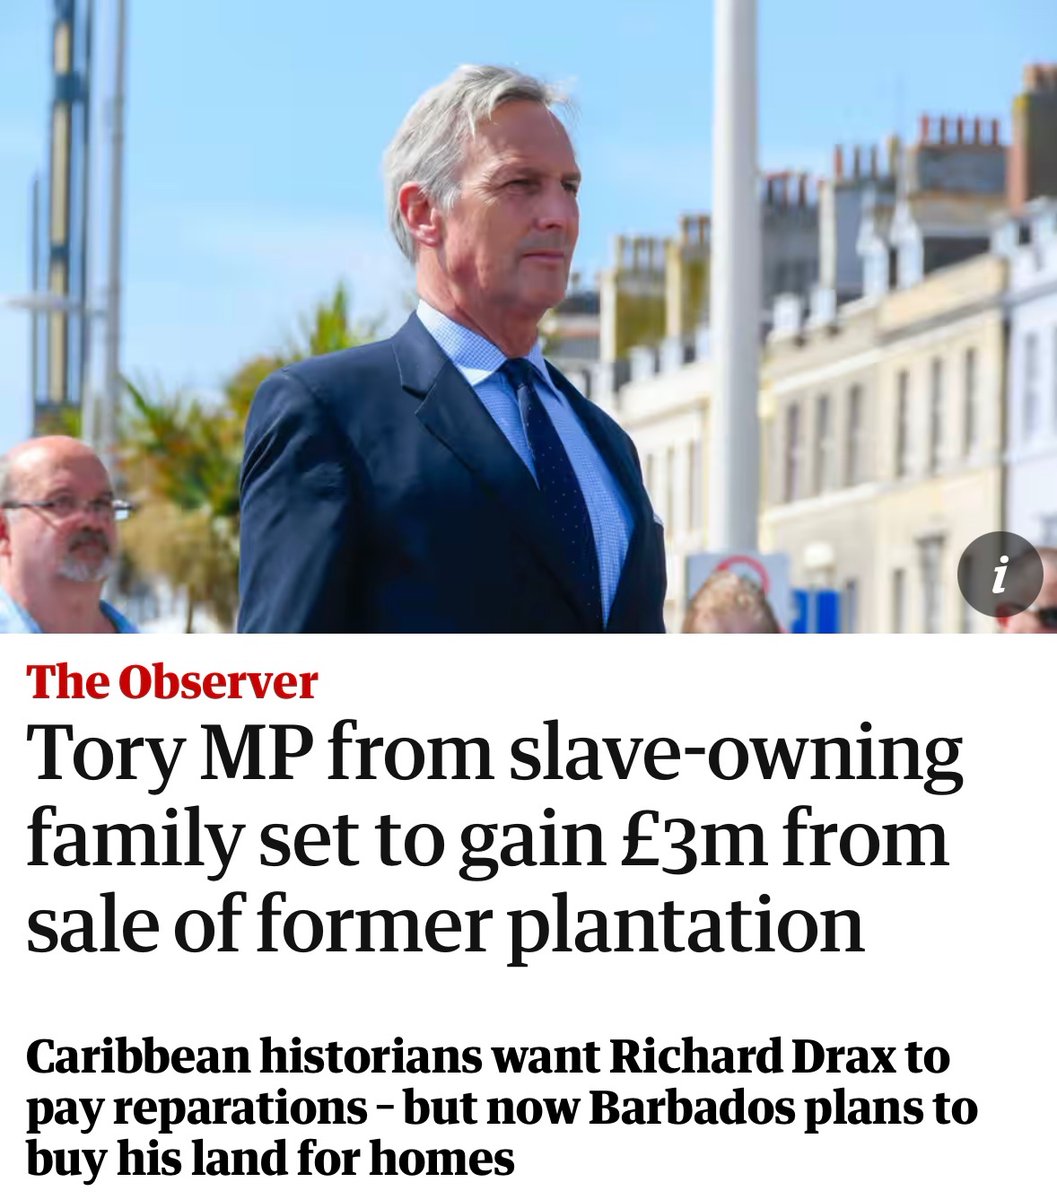 Richard Drax’s family made 150M from Barbados/Jamaica’s slave trade/sugar industry. Barbados needs the land to build housing & are buying it for £3M @miaamormottley just take the land!! How are descendants of SLAVES paying descendants of SLAVE OWNERS for land?